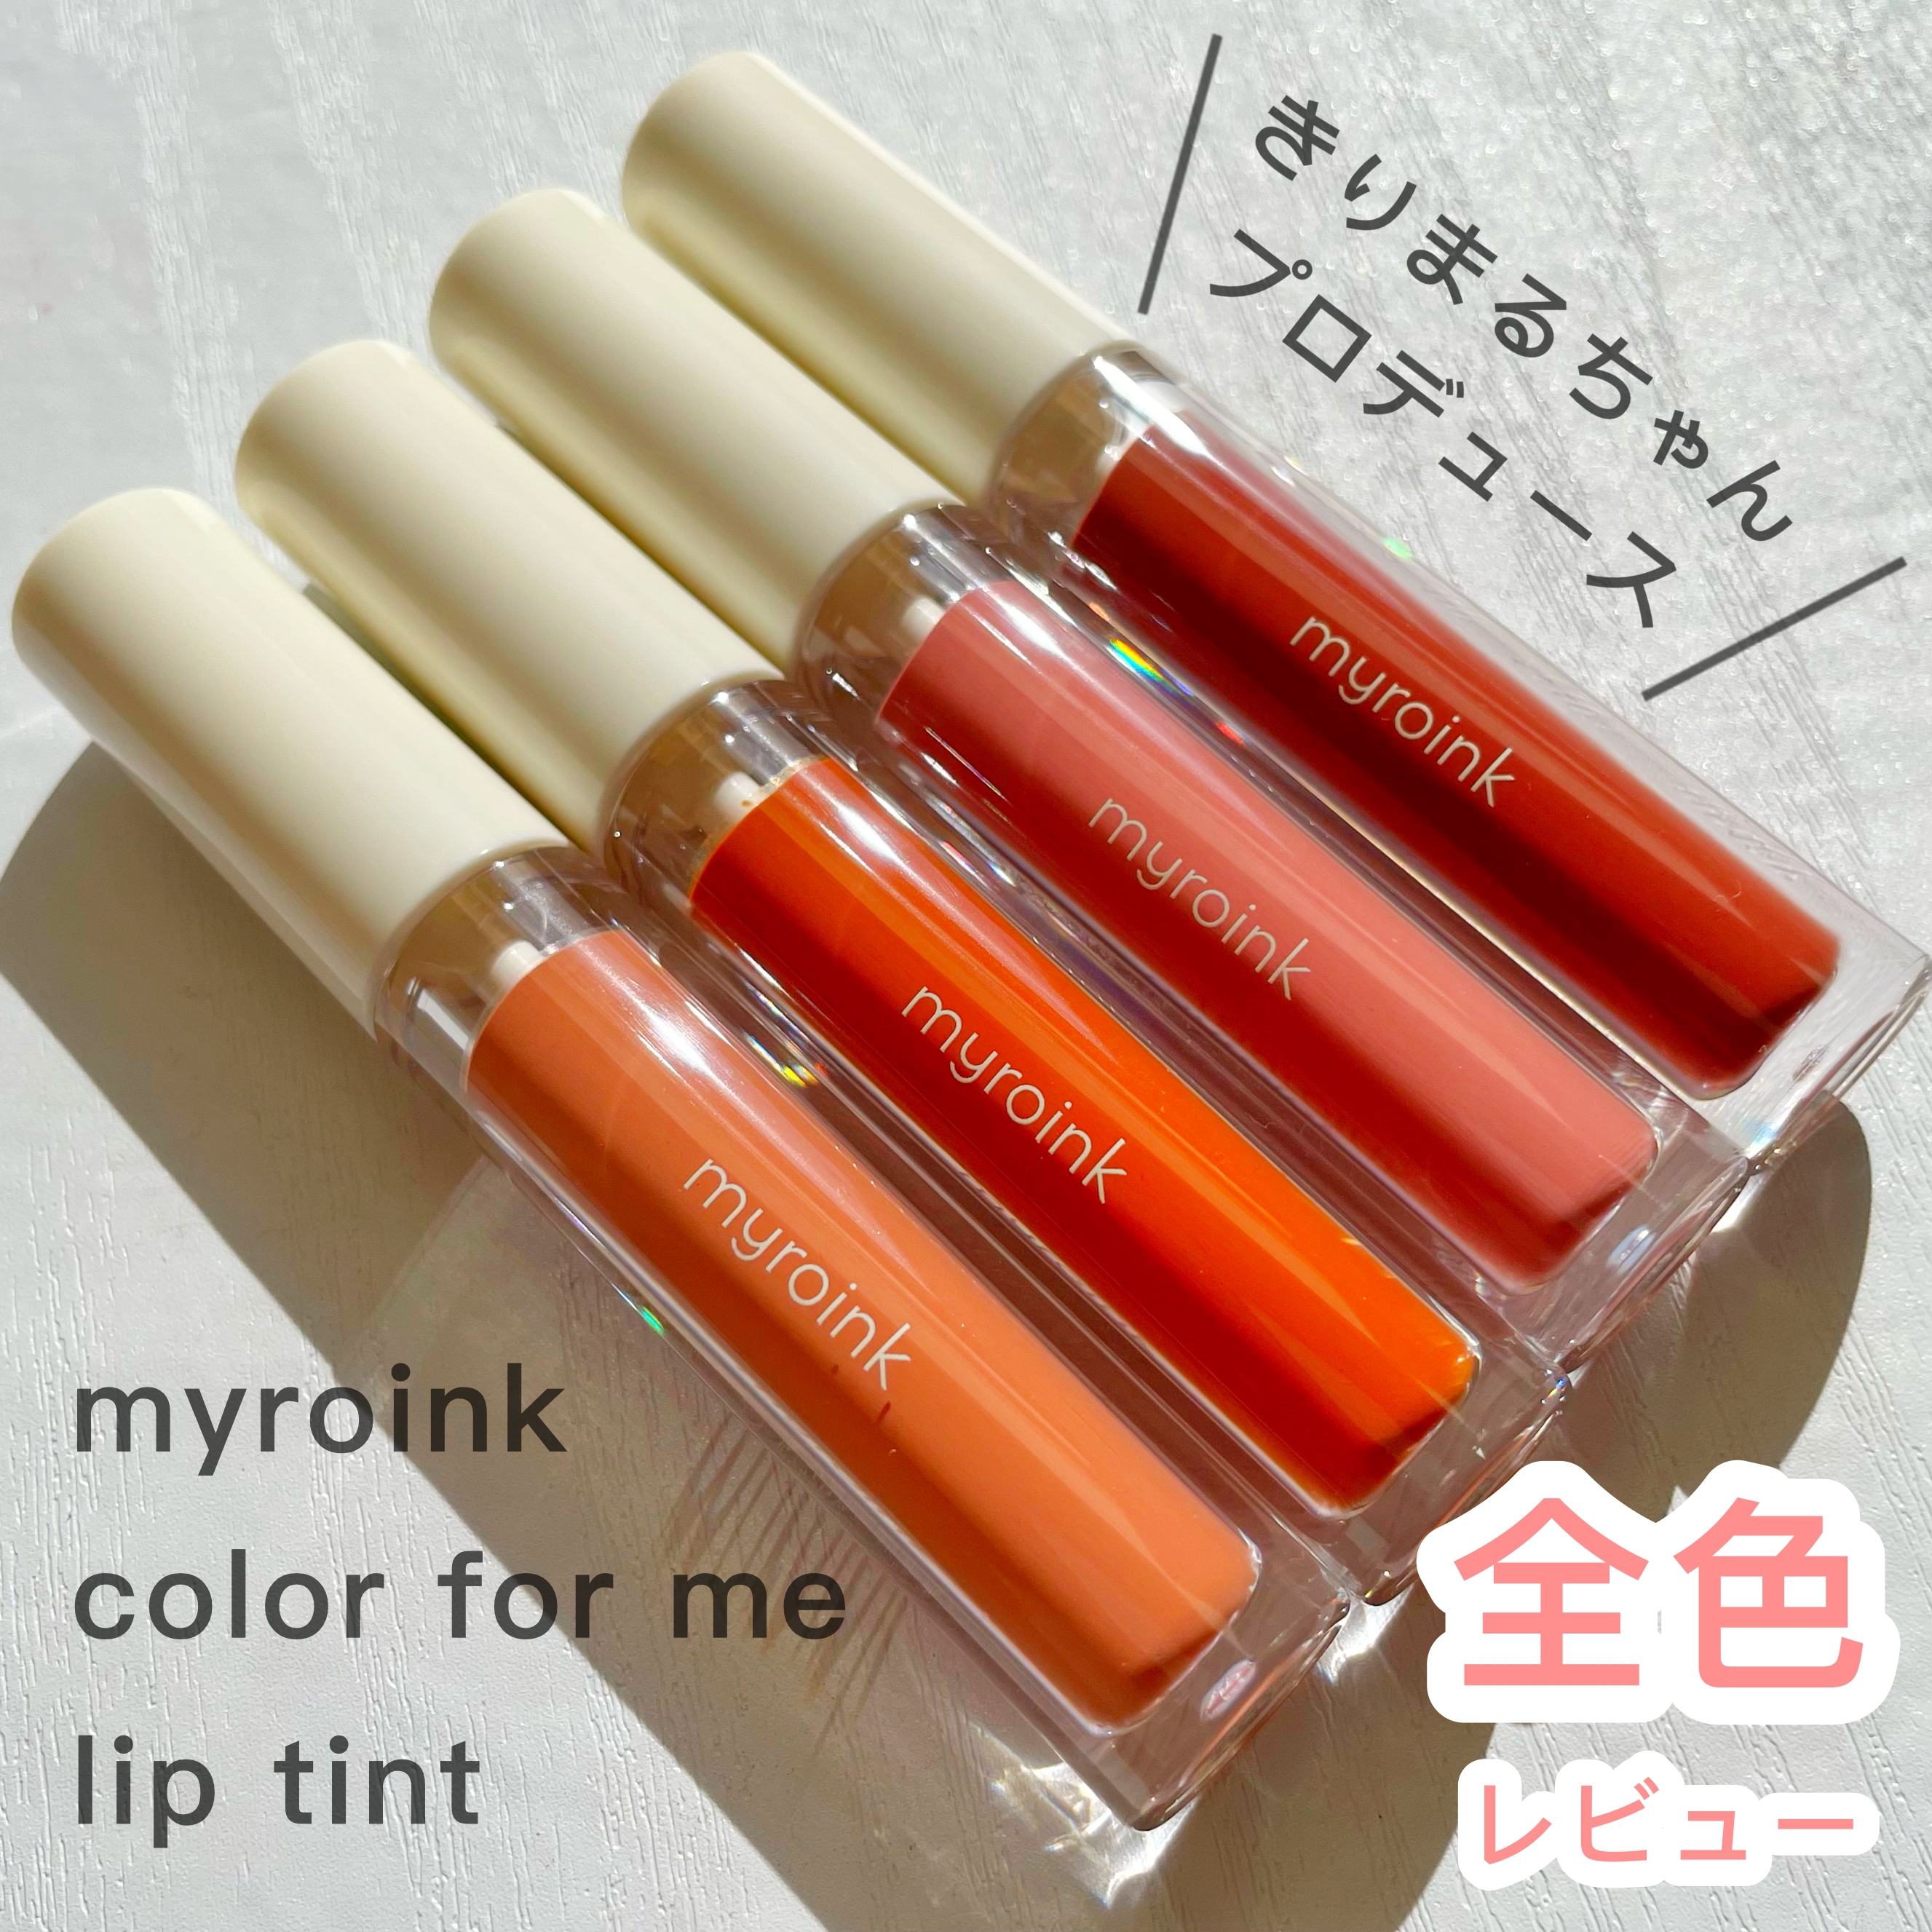 myroink color for me lip tintを使ったKeiさんのクチコミ画像1